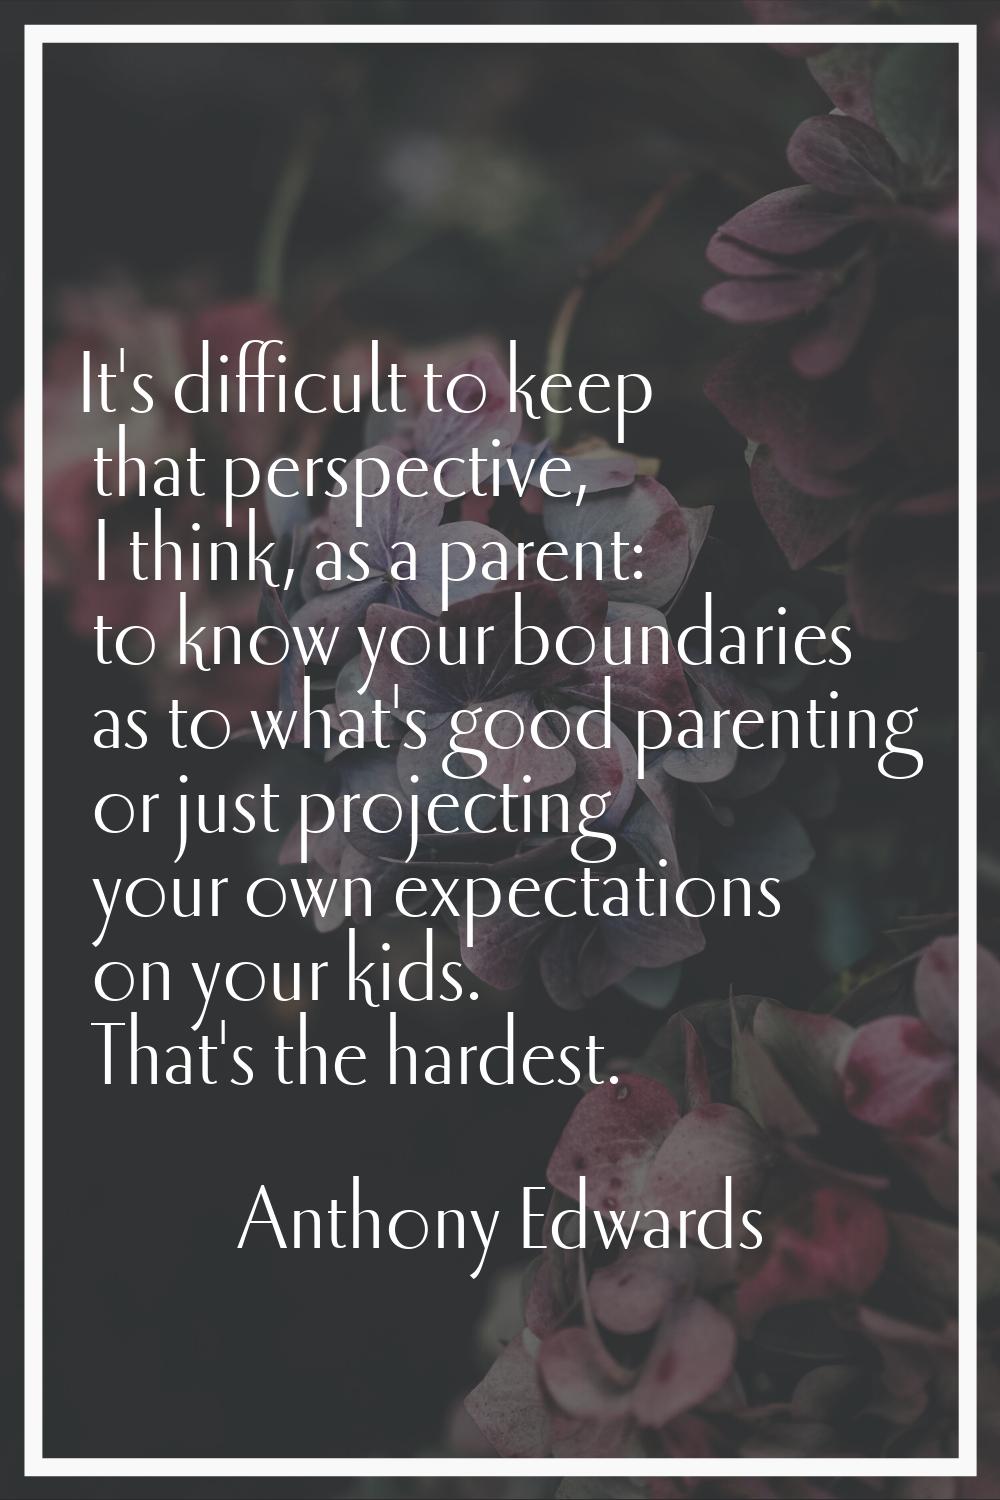 It's difficult to keep that perspective, I think, as a parent: to know your boundaries as to what's